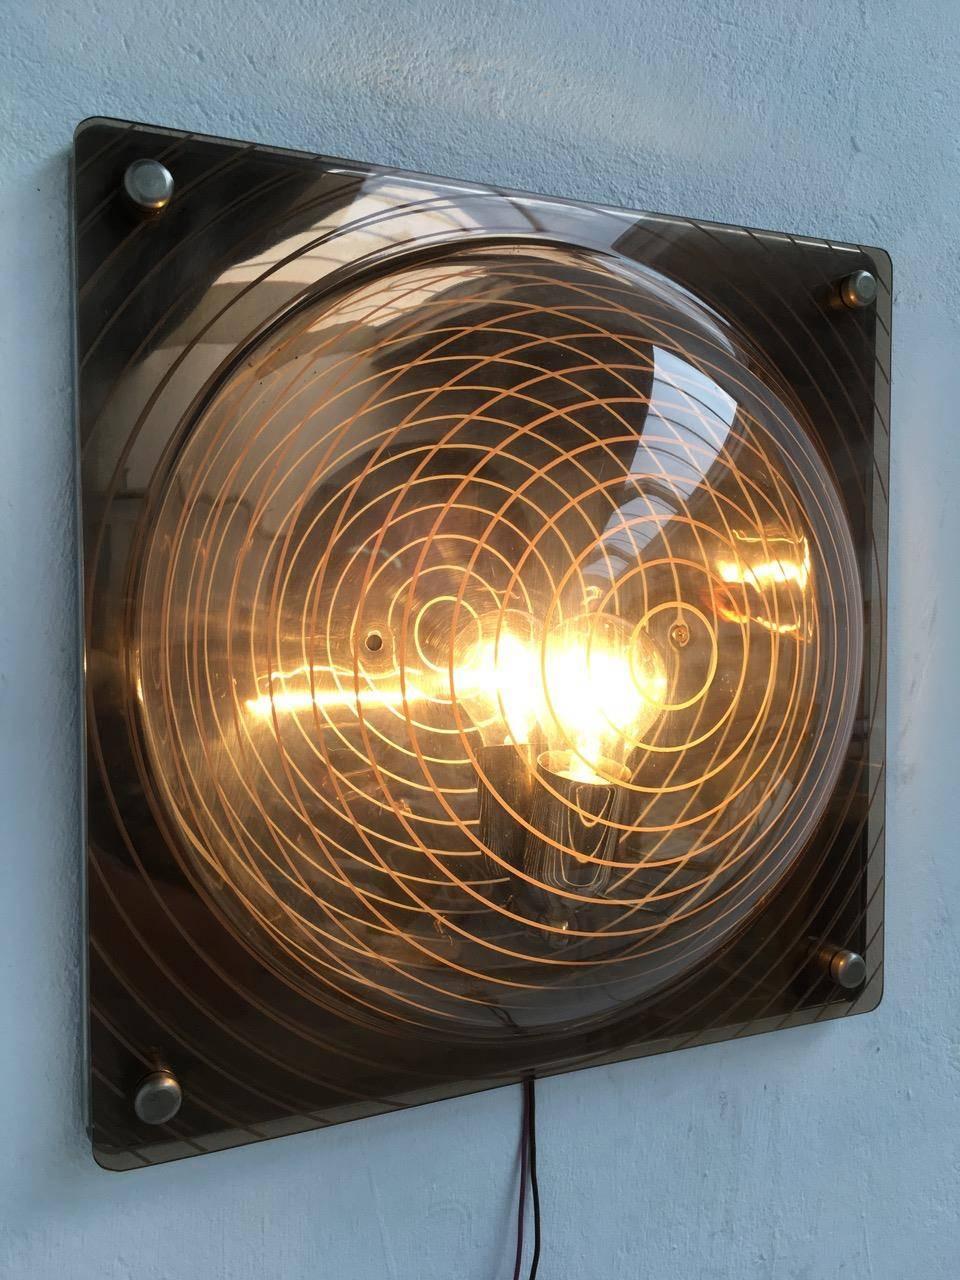 Rare and wonderful light sculpture in the style of important Italian Avant Garde artist Ugo La Pietra. This wall lamp clearly takes its cue from Ugo La Pietra's 'strutturazioni tissurali' studies of the mid-1960s where incised patterns were cut into